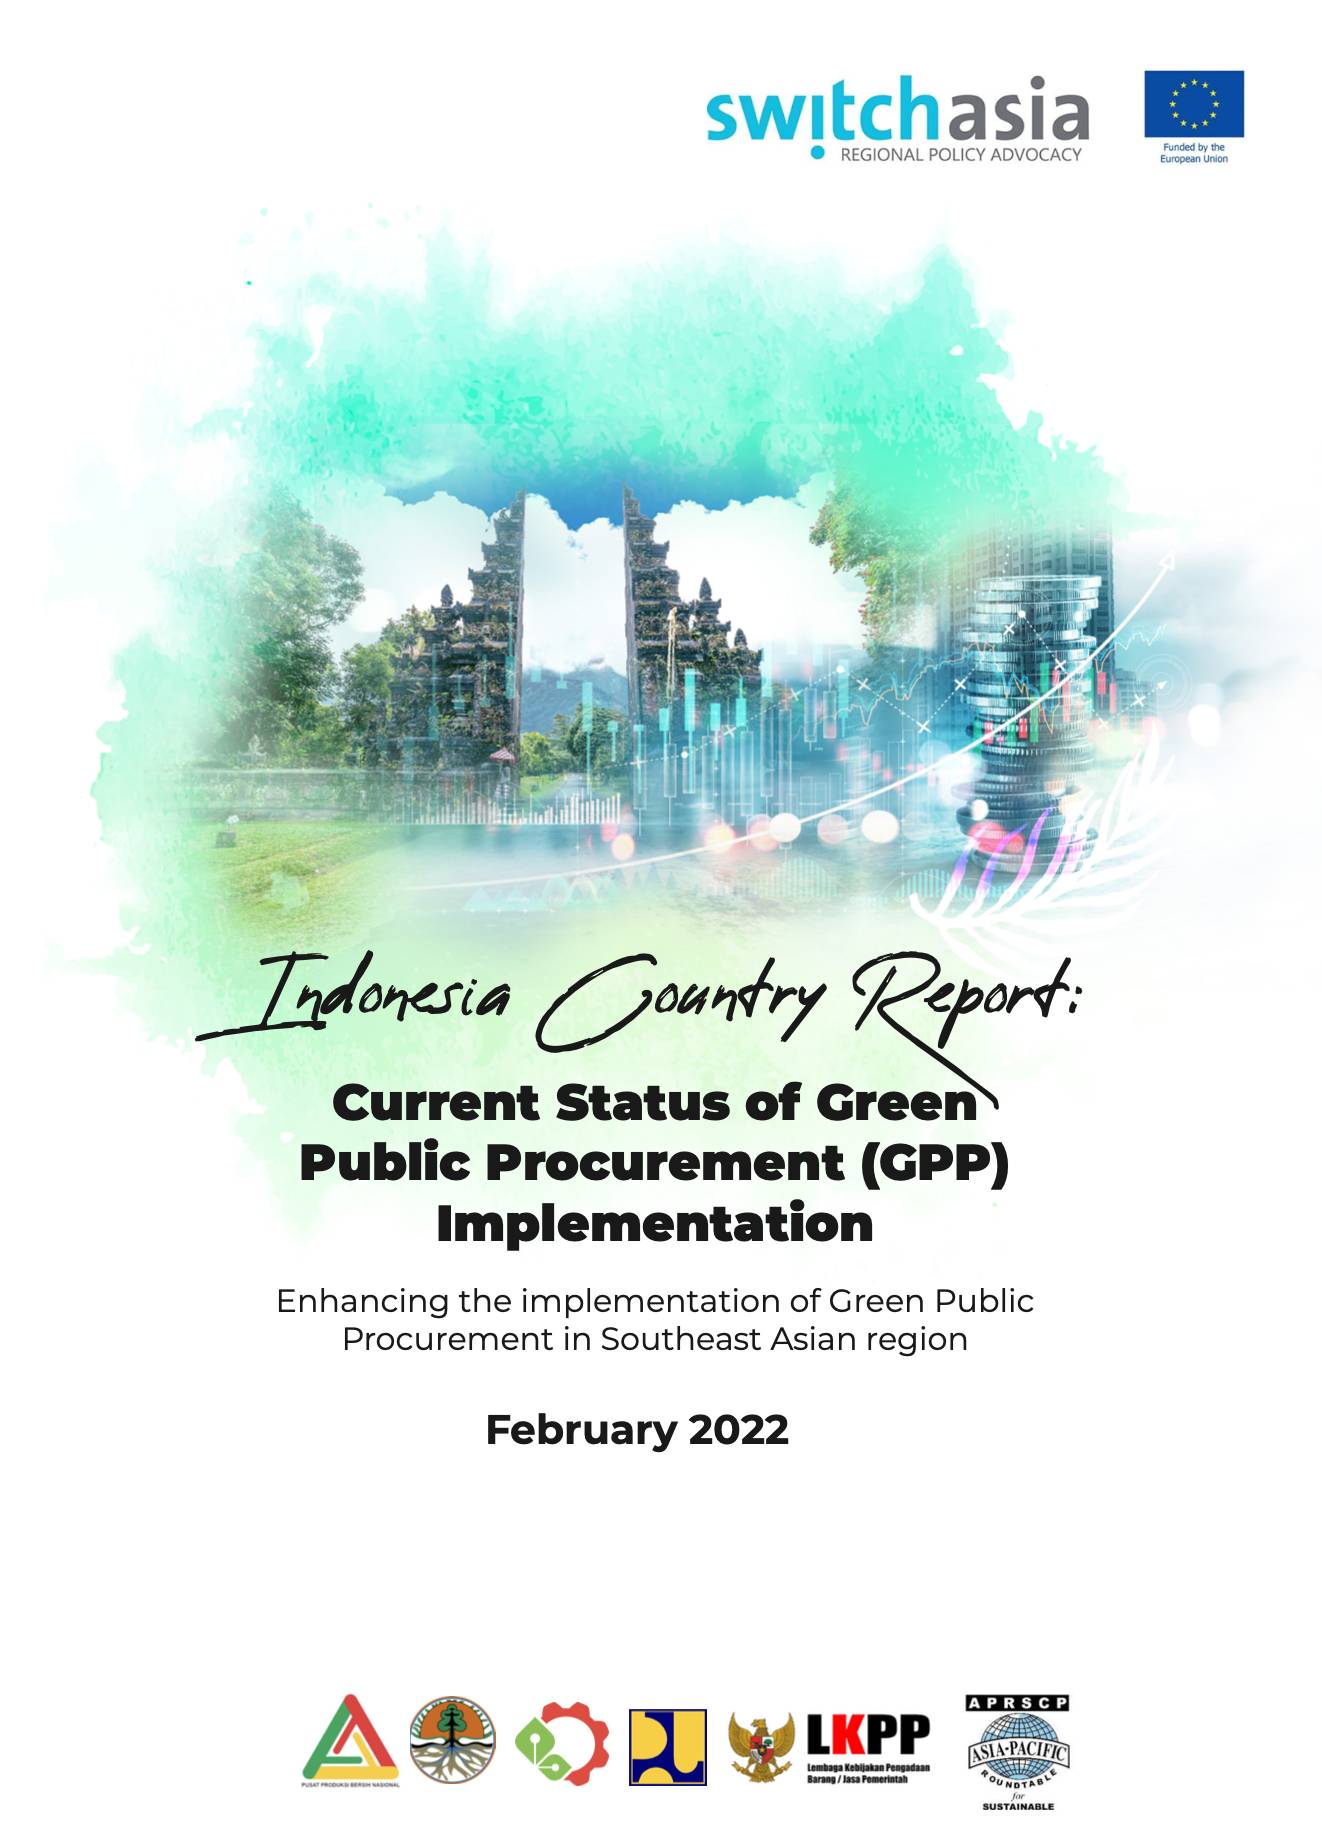 Indonesia Country Report: Current Status of Green Public Procurement Implementation